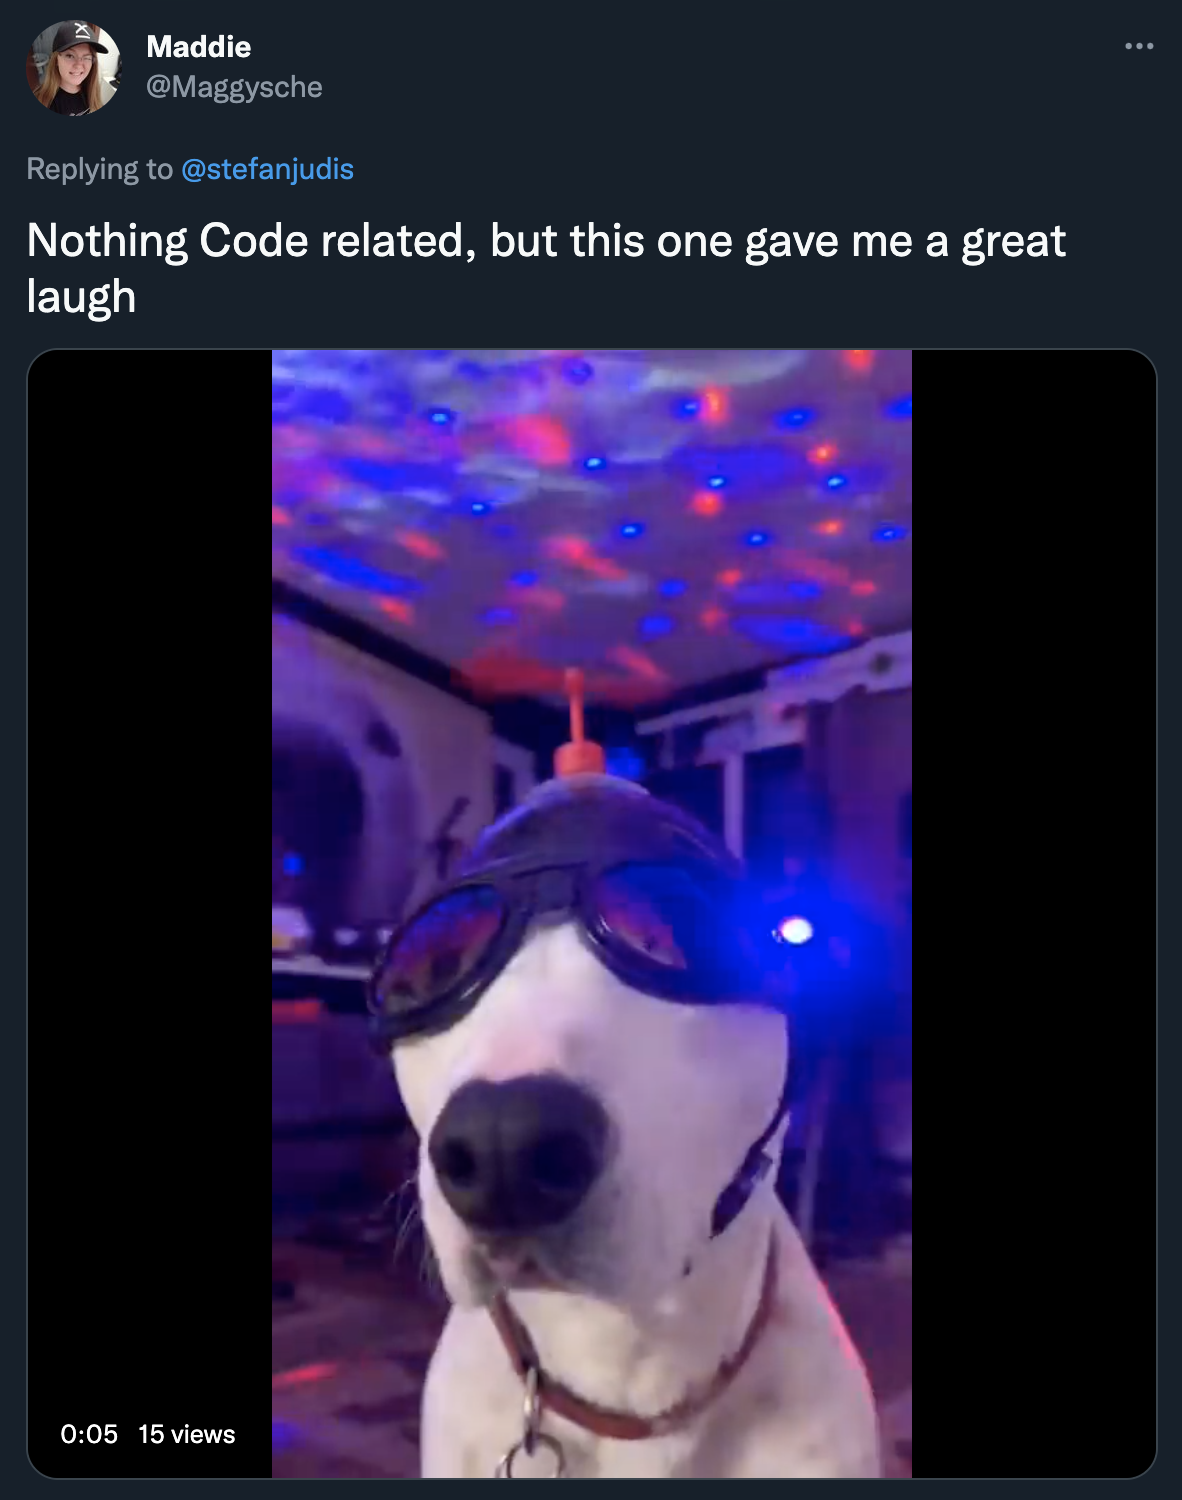 Tweet from Maddie showing a dog with pilot glasses.